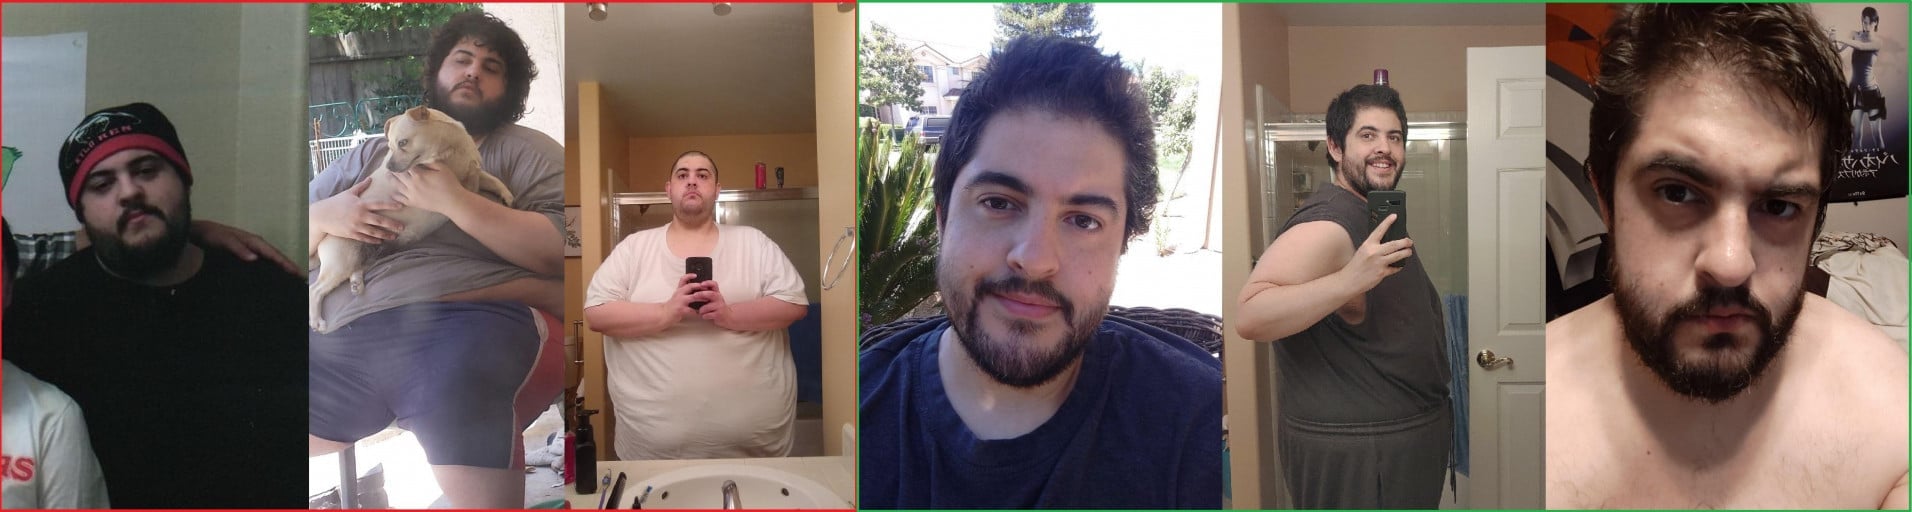 200 lbs Fat Loss Before and After 6 foot Male 520 lbs to 320 lbs